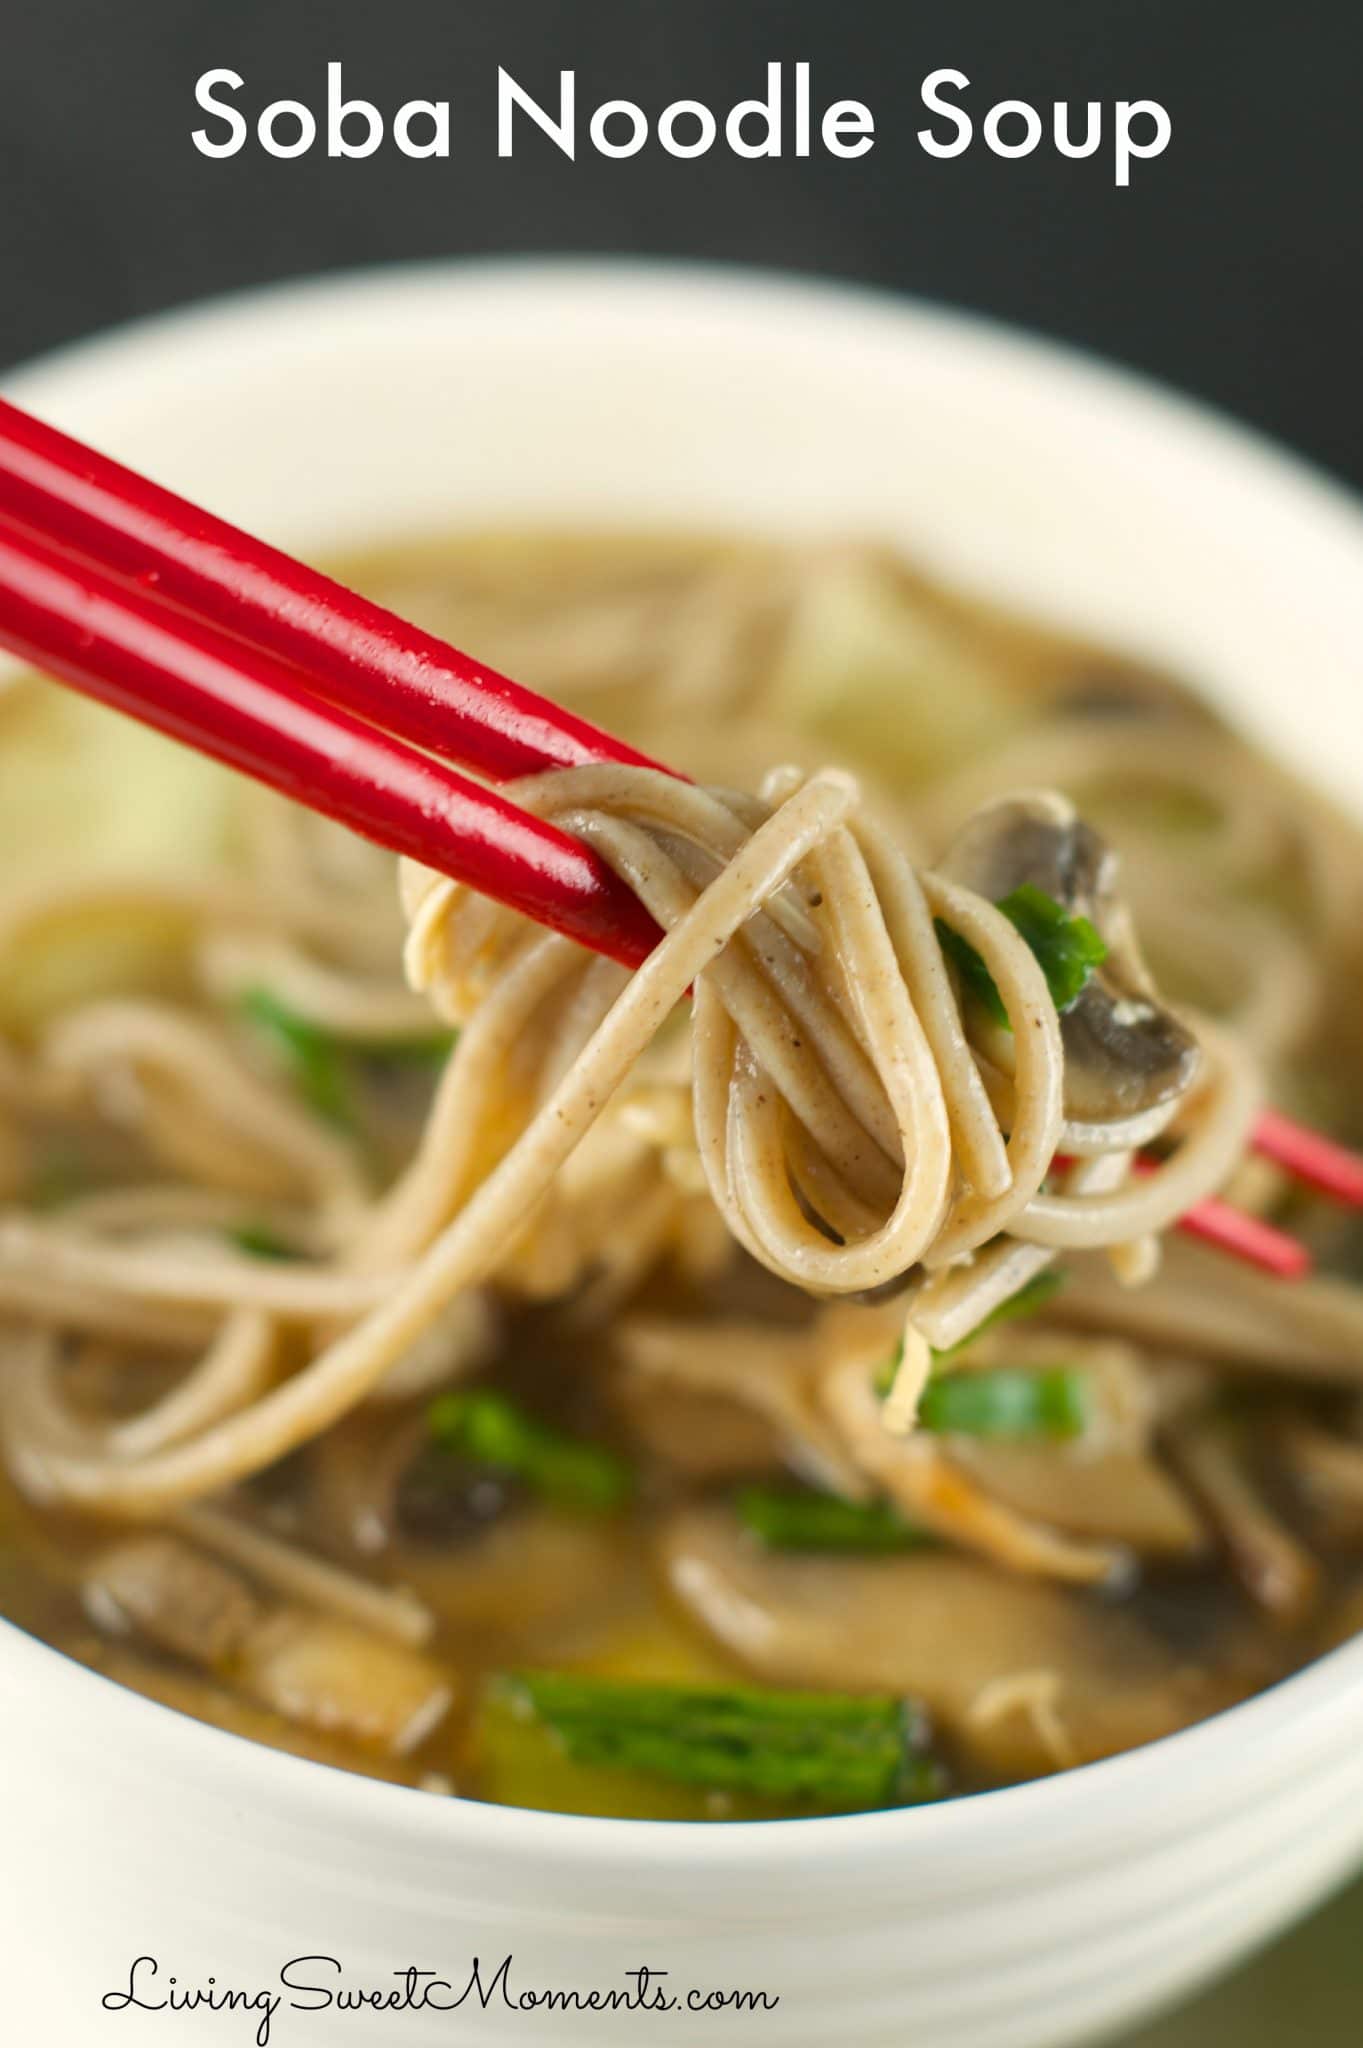 Chicken Soba Noodle Soup - Easy to make and delicious! A flavorful broth is served with soba noodles, chicken, bok choy and mushrooms in a comforting soup that will warm you during chilly nights. 